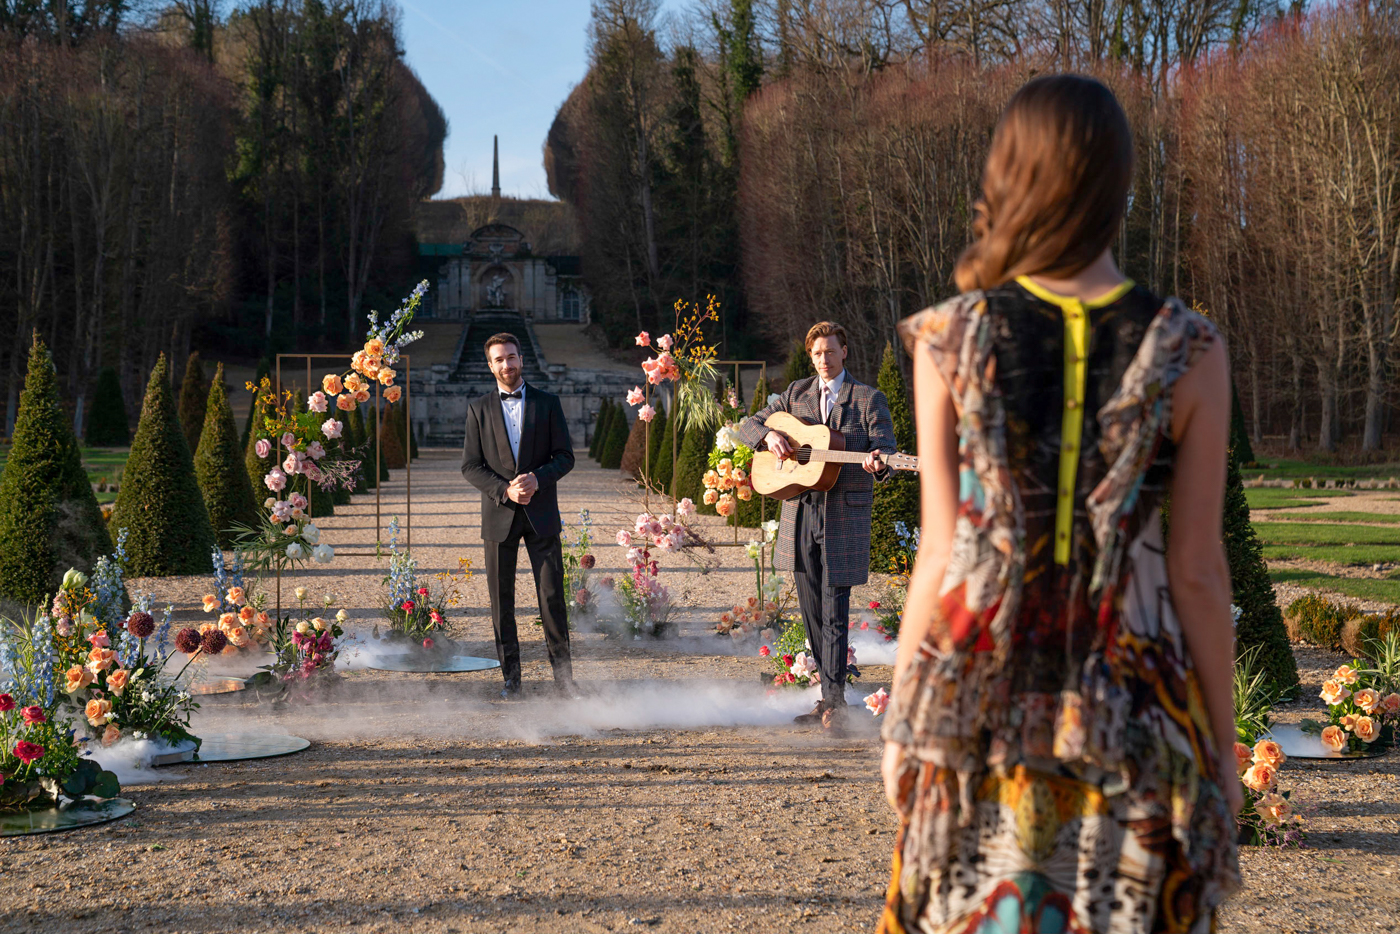 How to Propose to a Girl: fairytale engagement at Château de Villette, 40 km northwest of Paris, France. A master musician playing her favorite song to enhance the ambiance and production value.